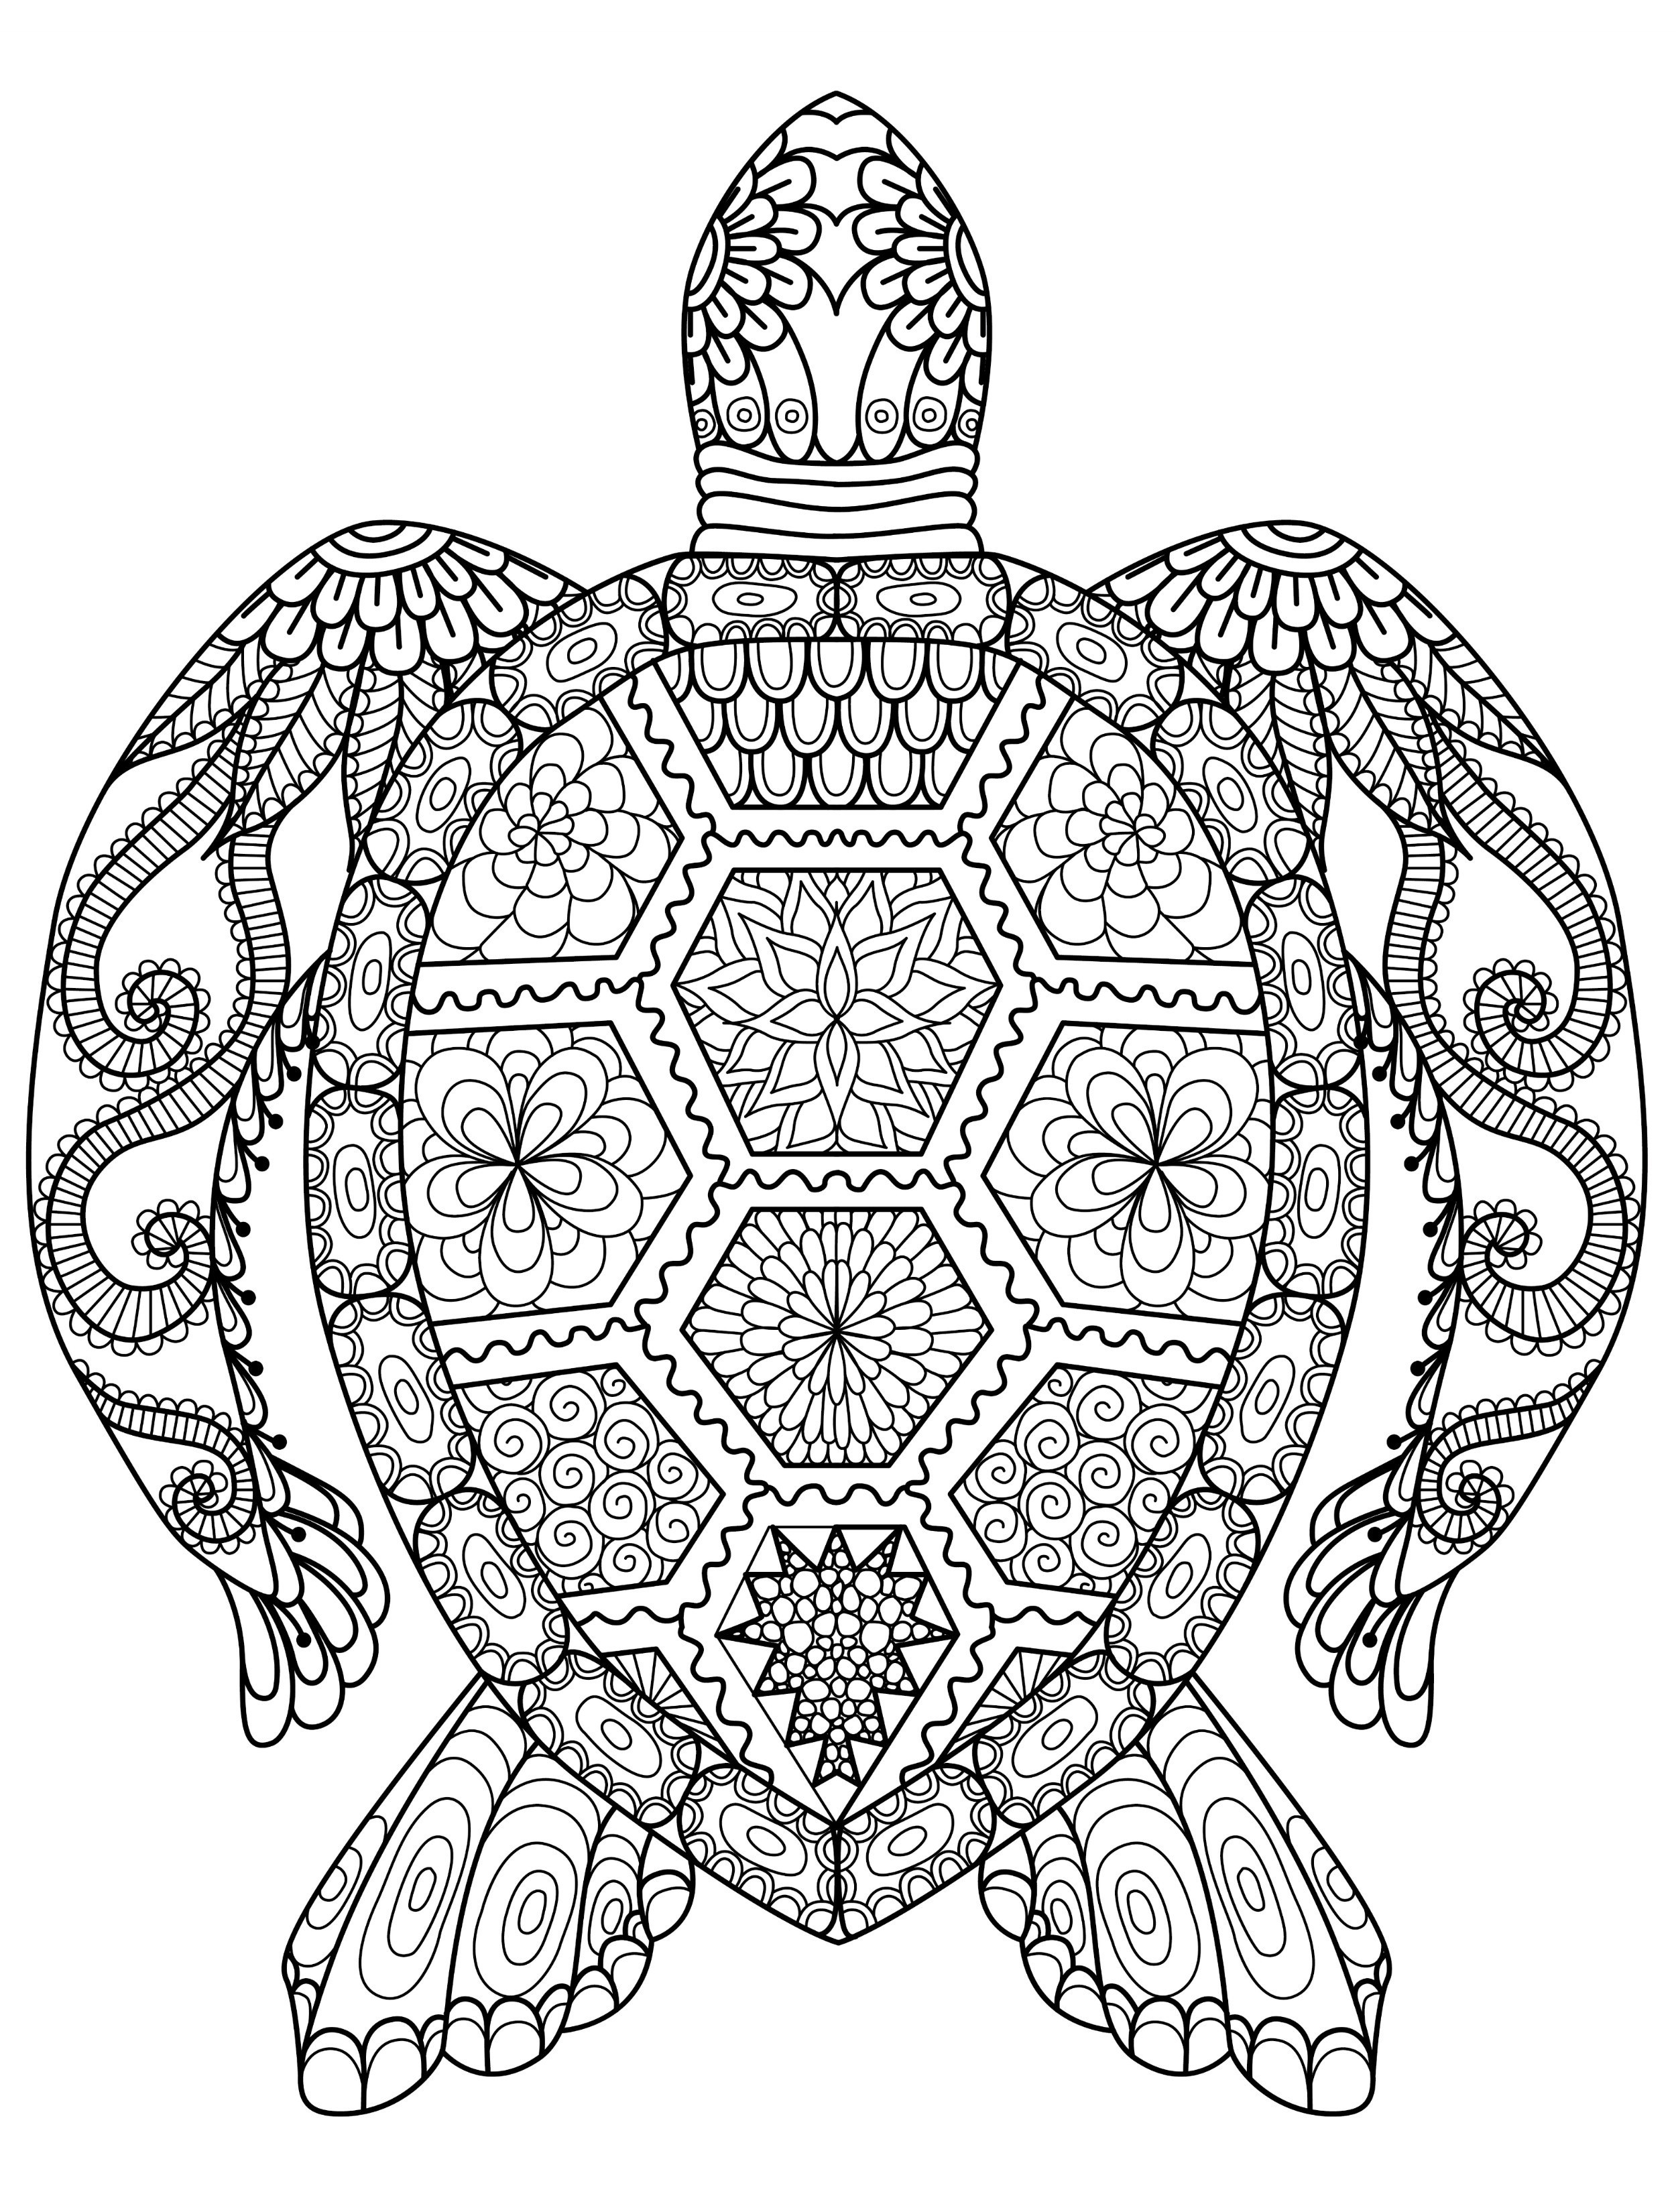 Fun Coloring Pages For Adults
 Adult Coloring Pages Animals Best Coloring Pages For Kids